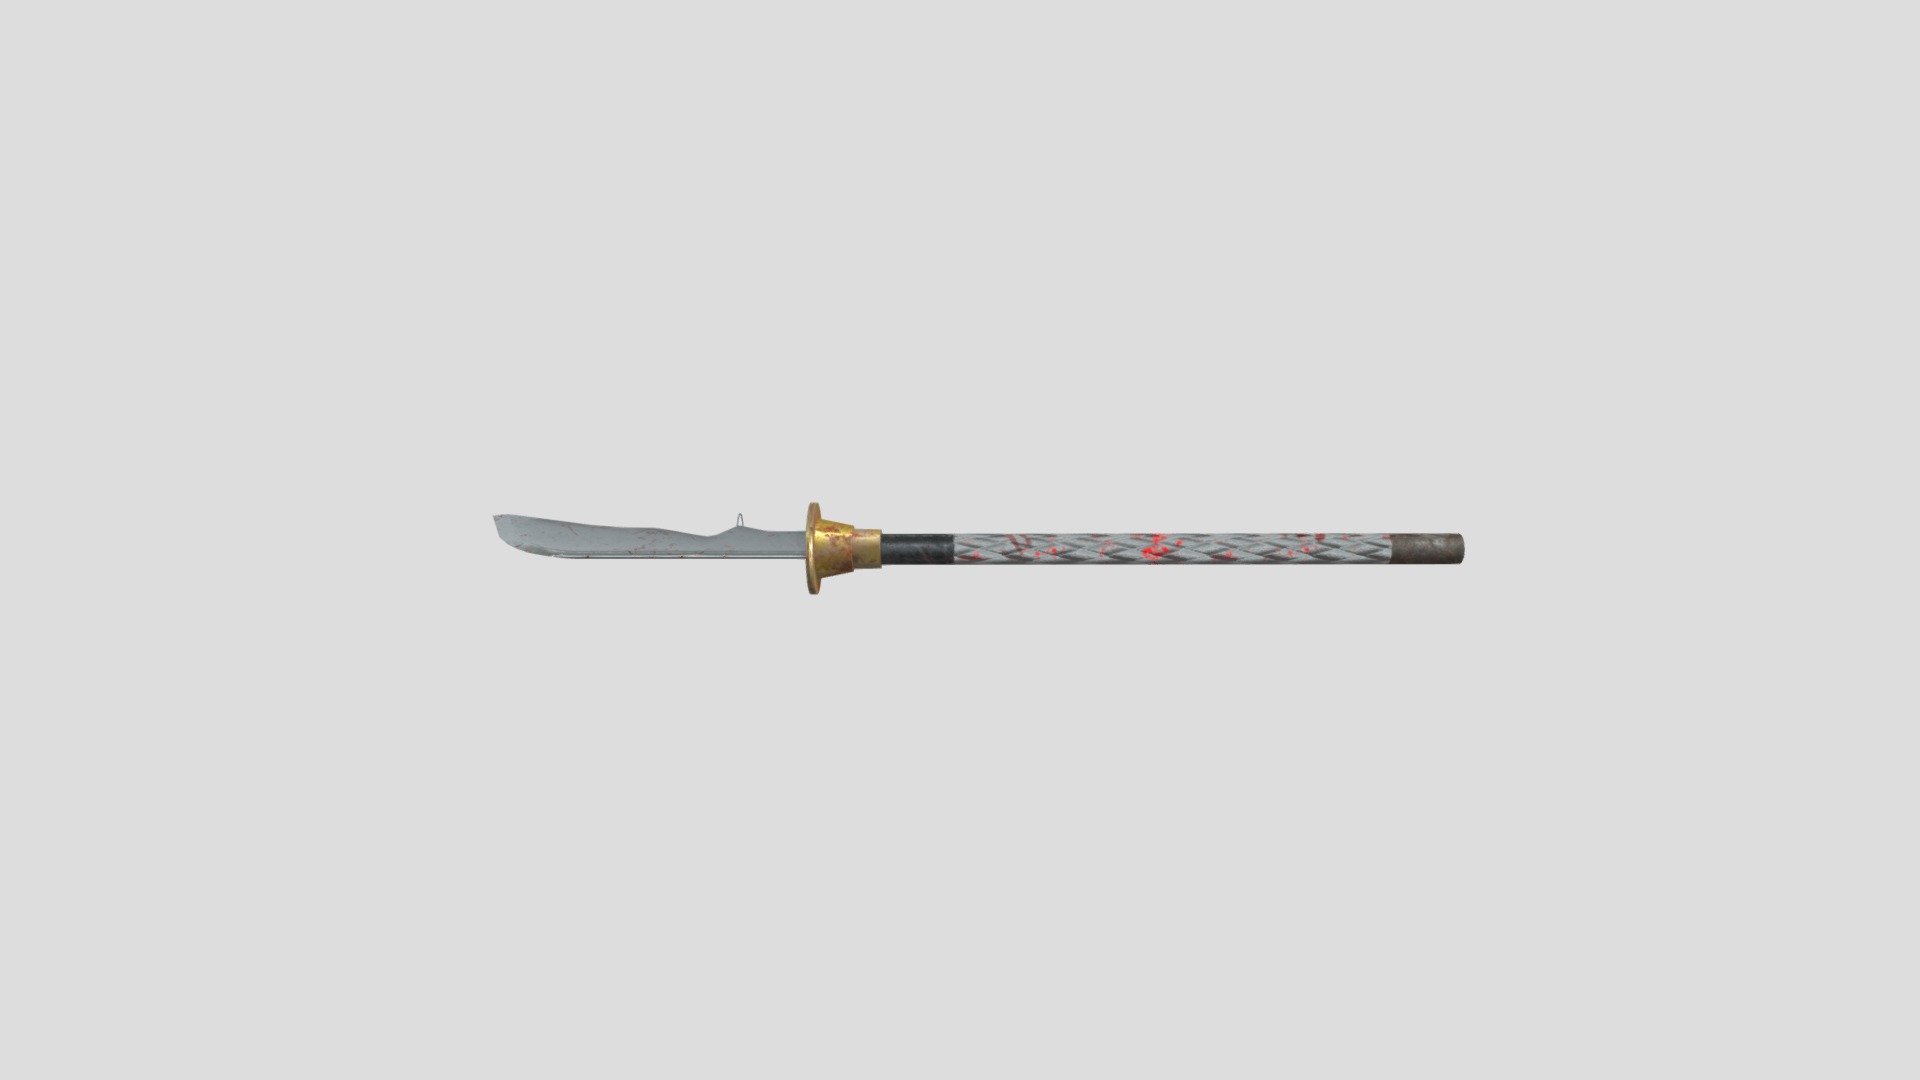 A model based off of the Traditional Chinese weapon called the Guandao. I used Maya to make the base model, added some damage and engravings in Zbrush and then used Substance Painter to texture it 3d model